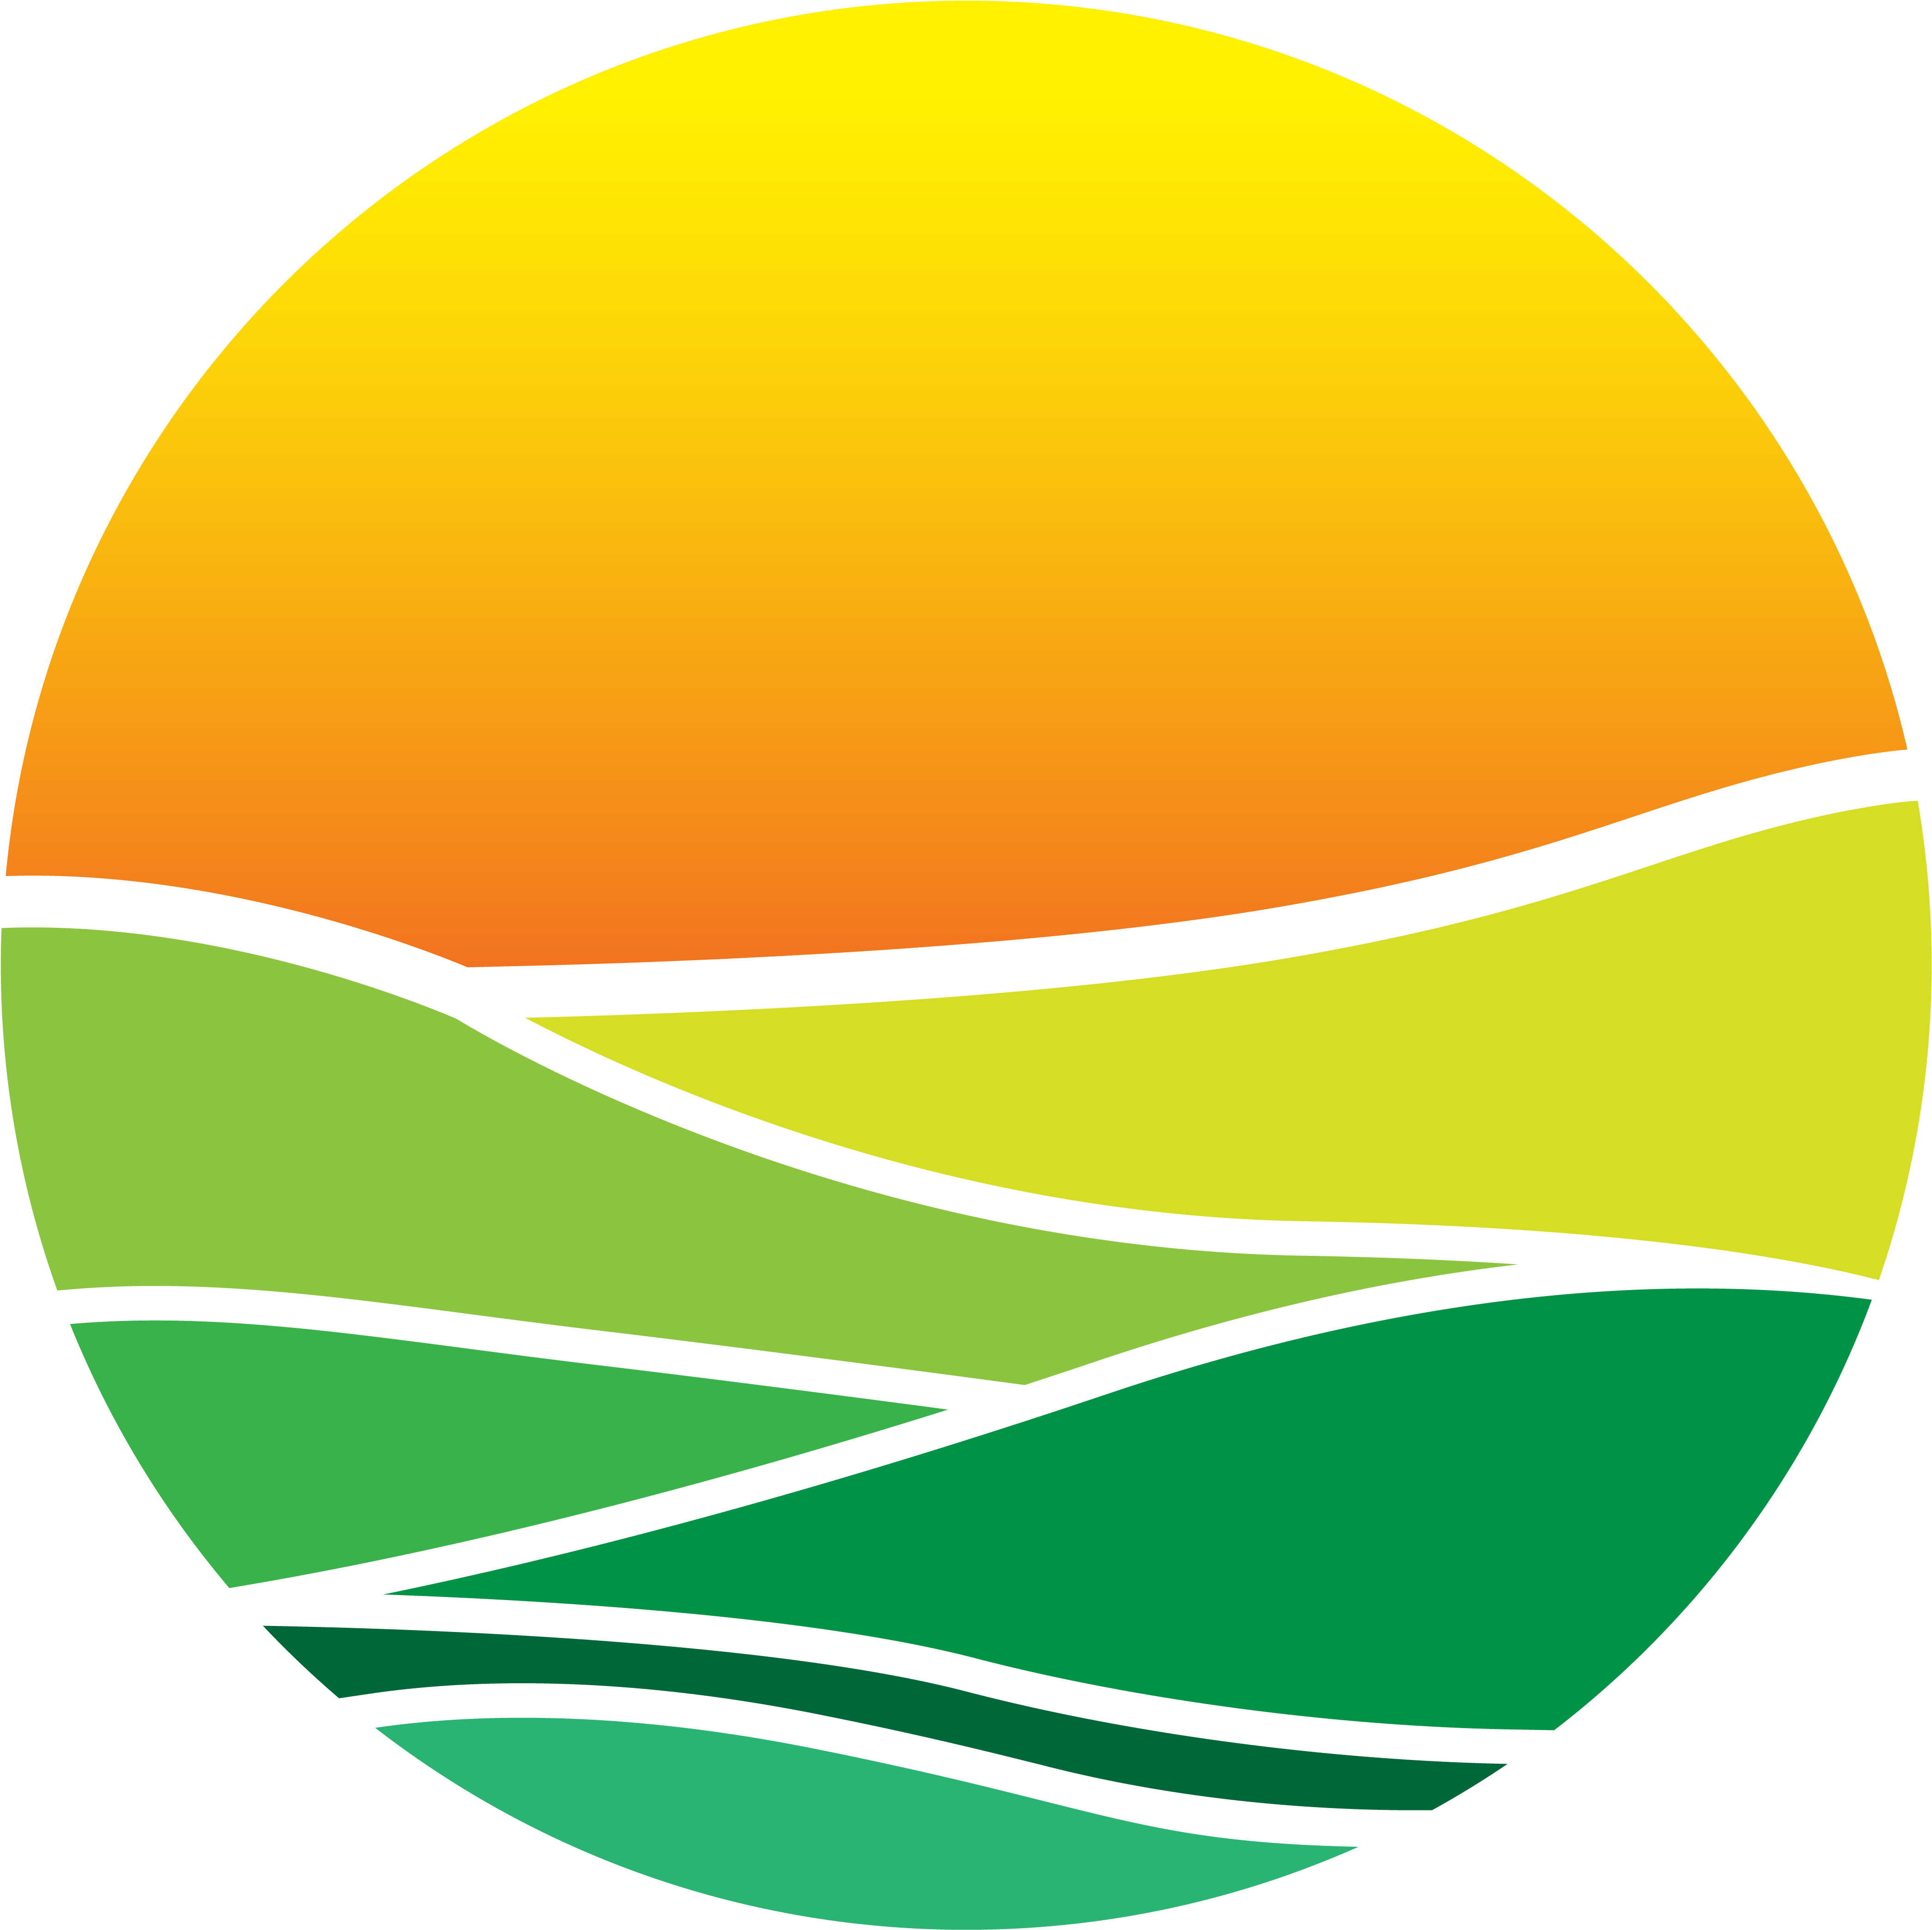 A Circle With A Yellow Sun And Green Hills